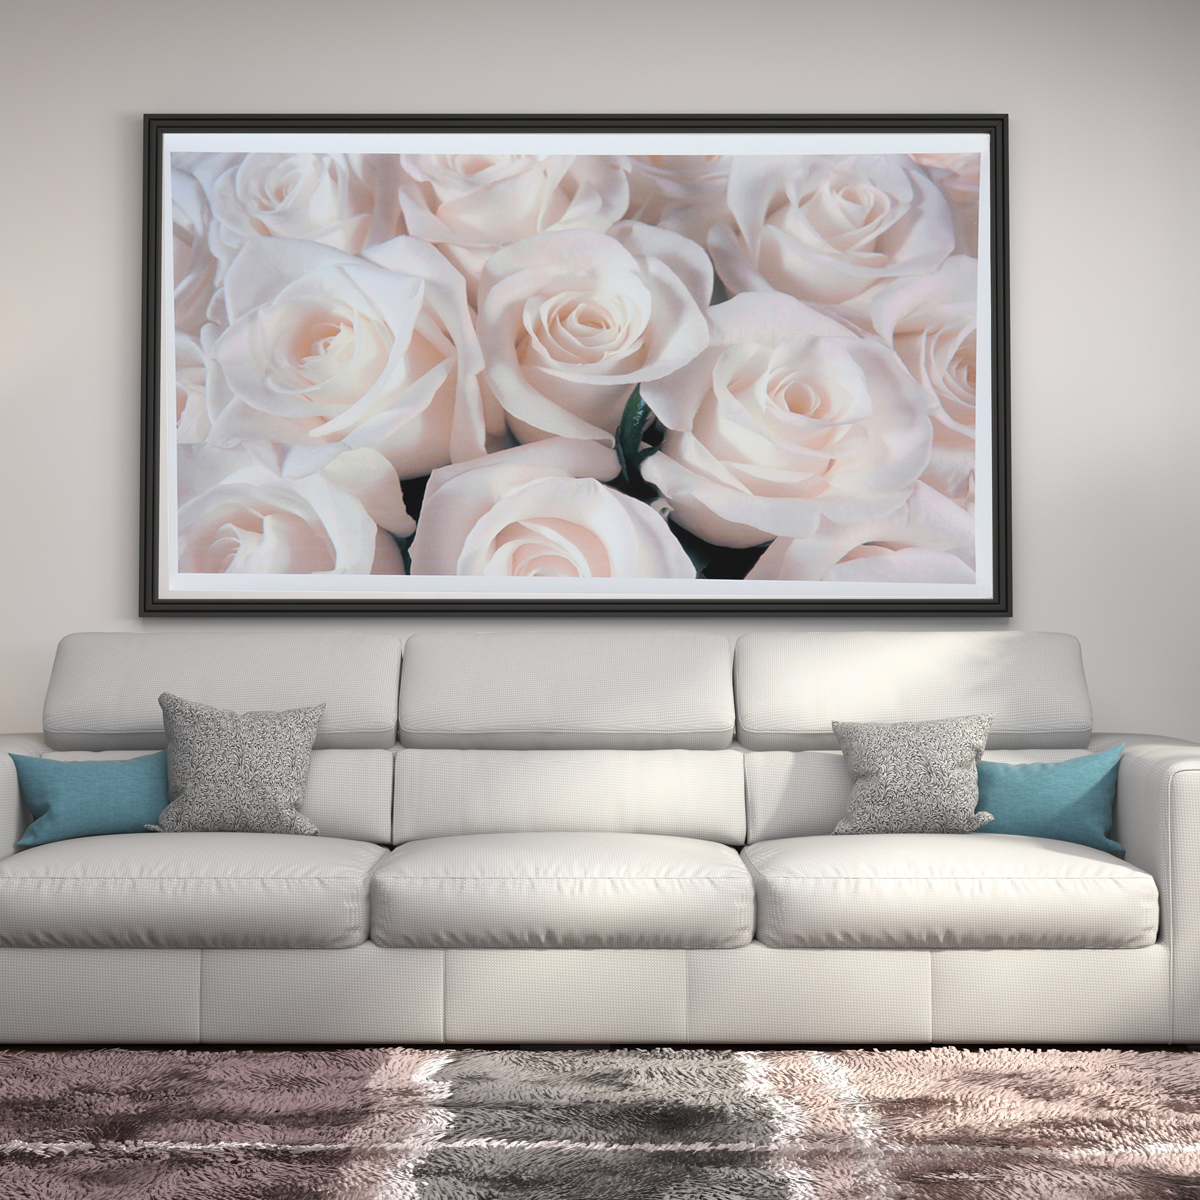 19quotx32quot-Paintings-Roses-Blossom-Flower-Canvas-Prints-Pictures-Art-Home-Decor-Frameless-1407575